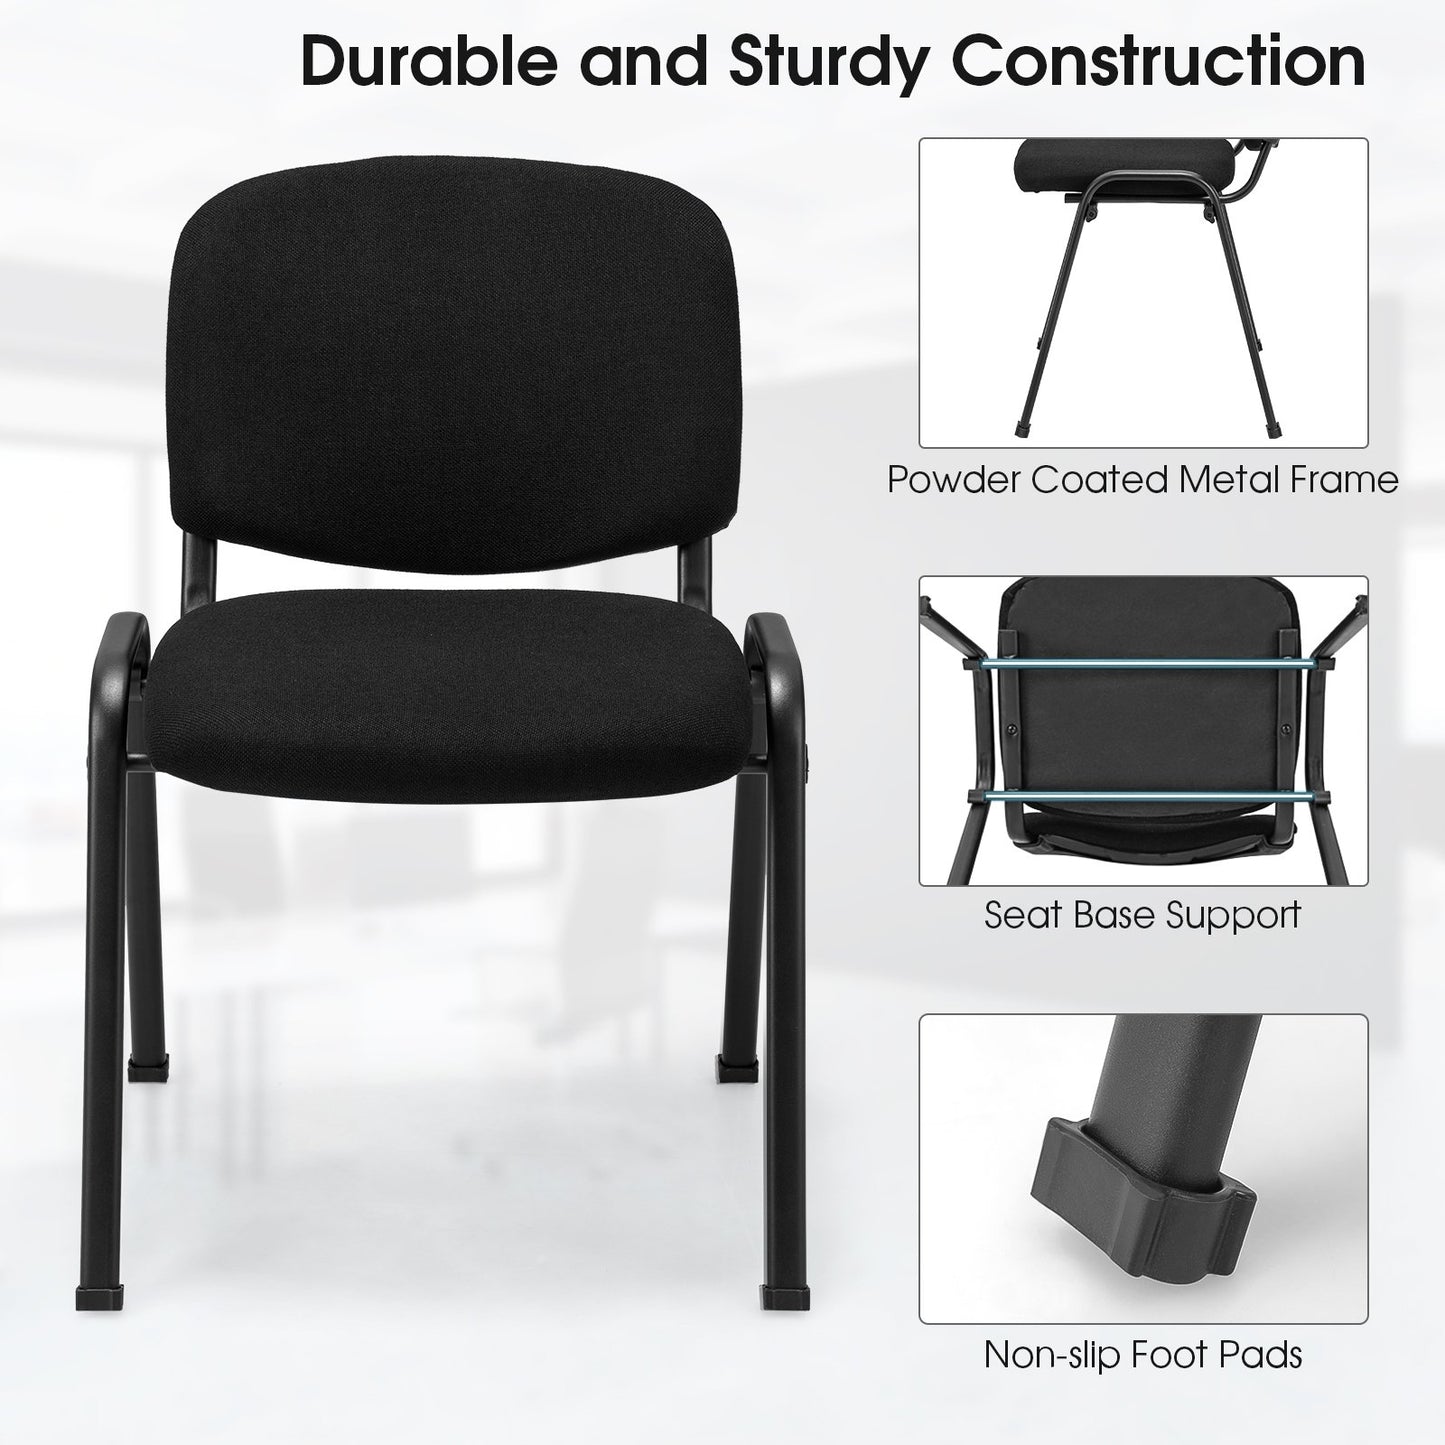 Office Chair with Metal Frame and Padded Cushions for Conference Room-Set of 2, Black